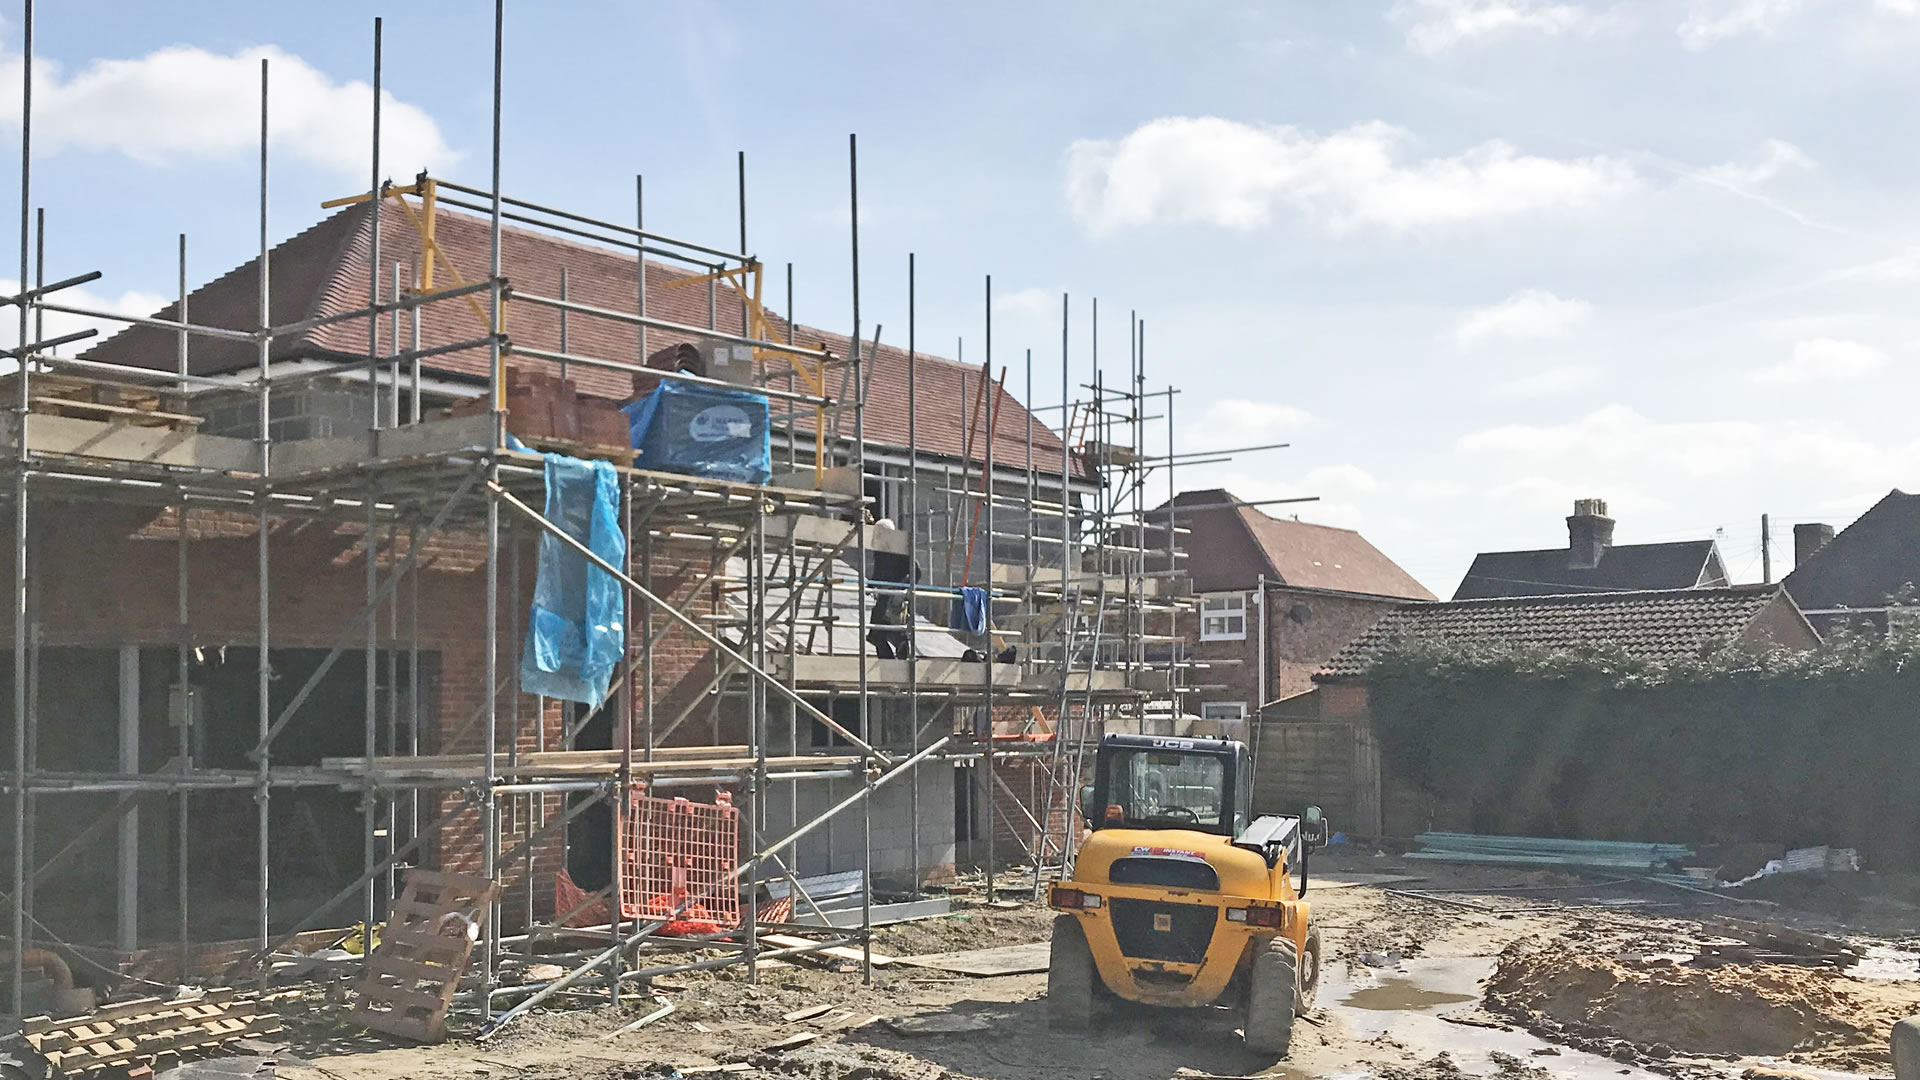 The Chequers in build image